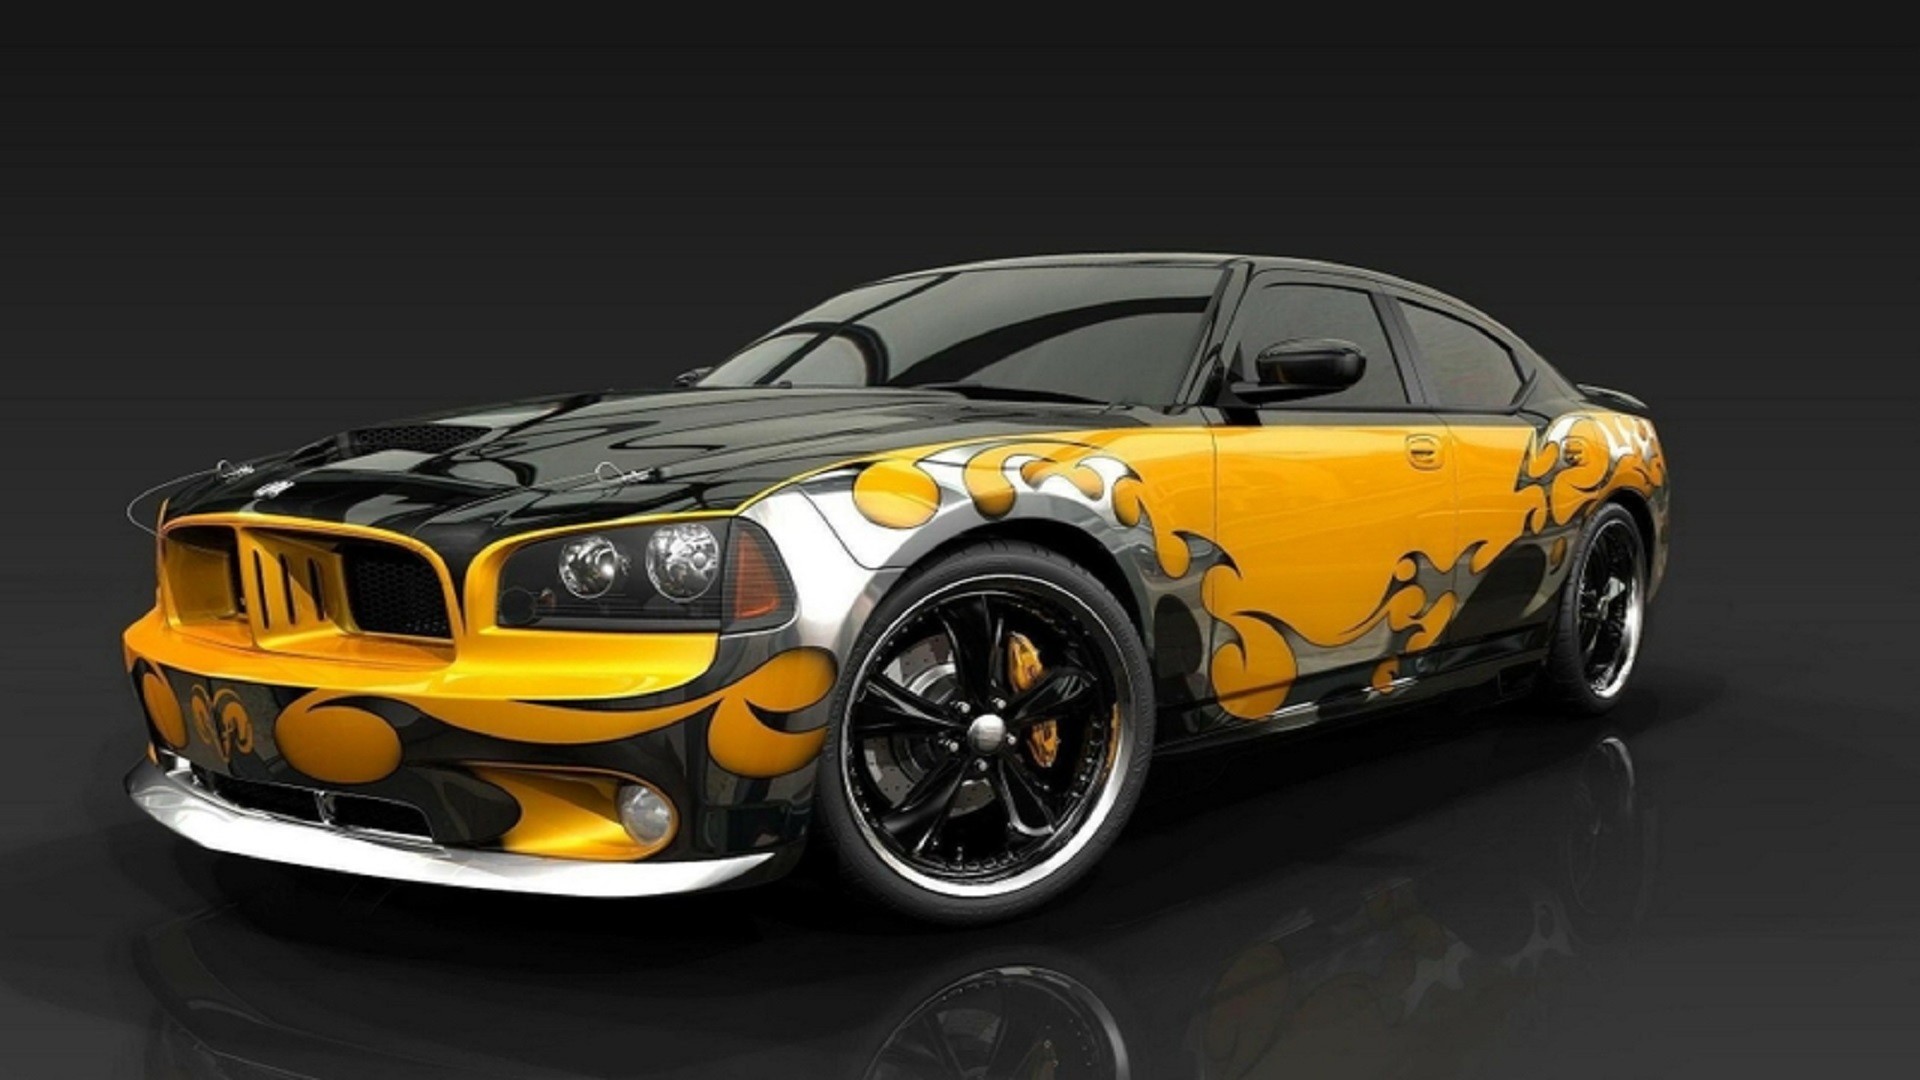 1920x1080 cars muscle cars creative dodge challenger dodge charger 1920x1200 free-hd- wallpapers-for